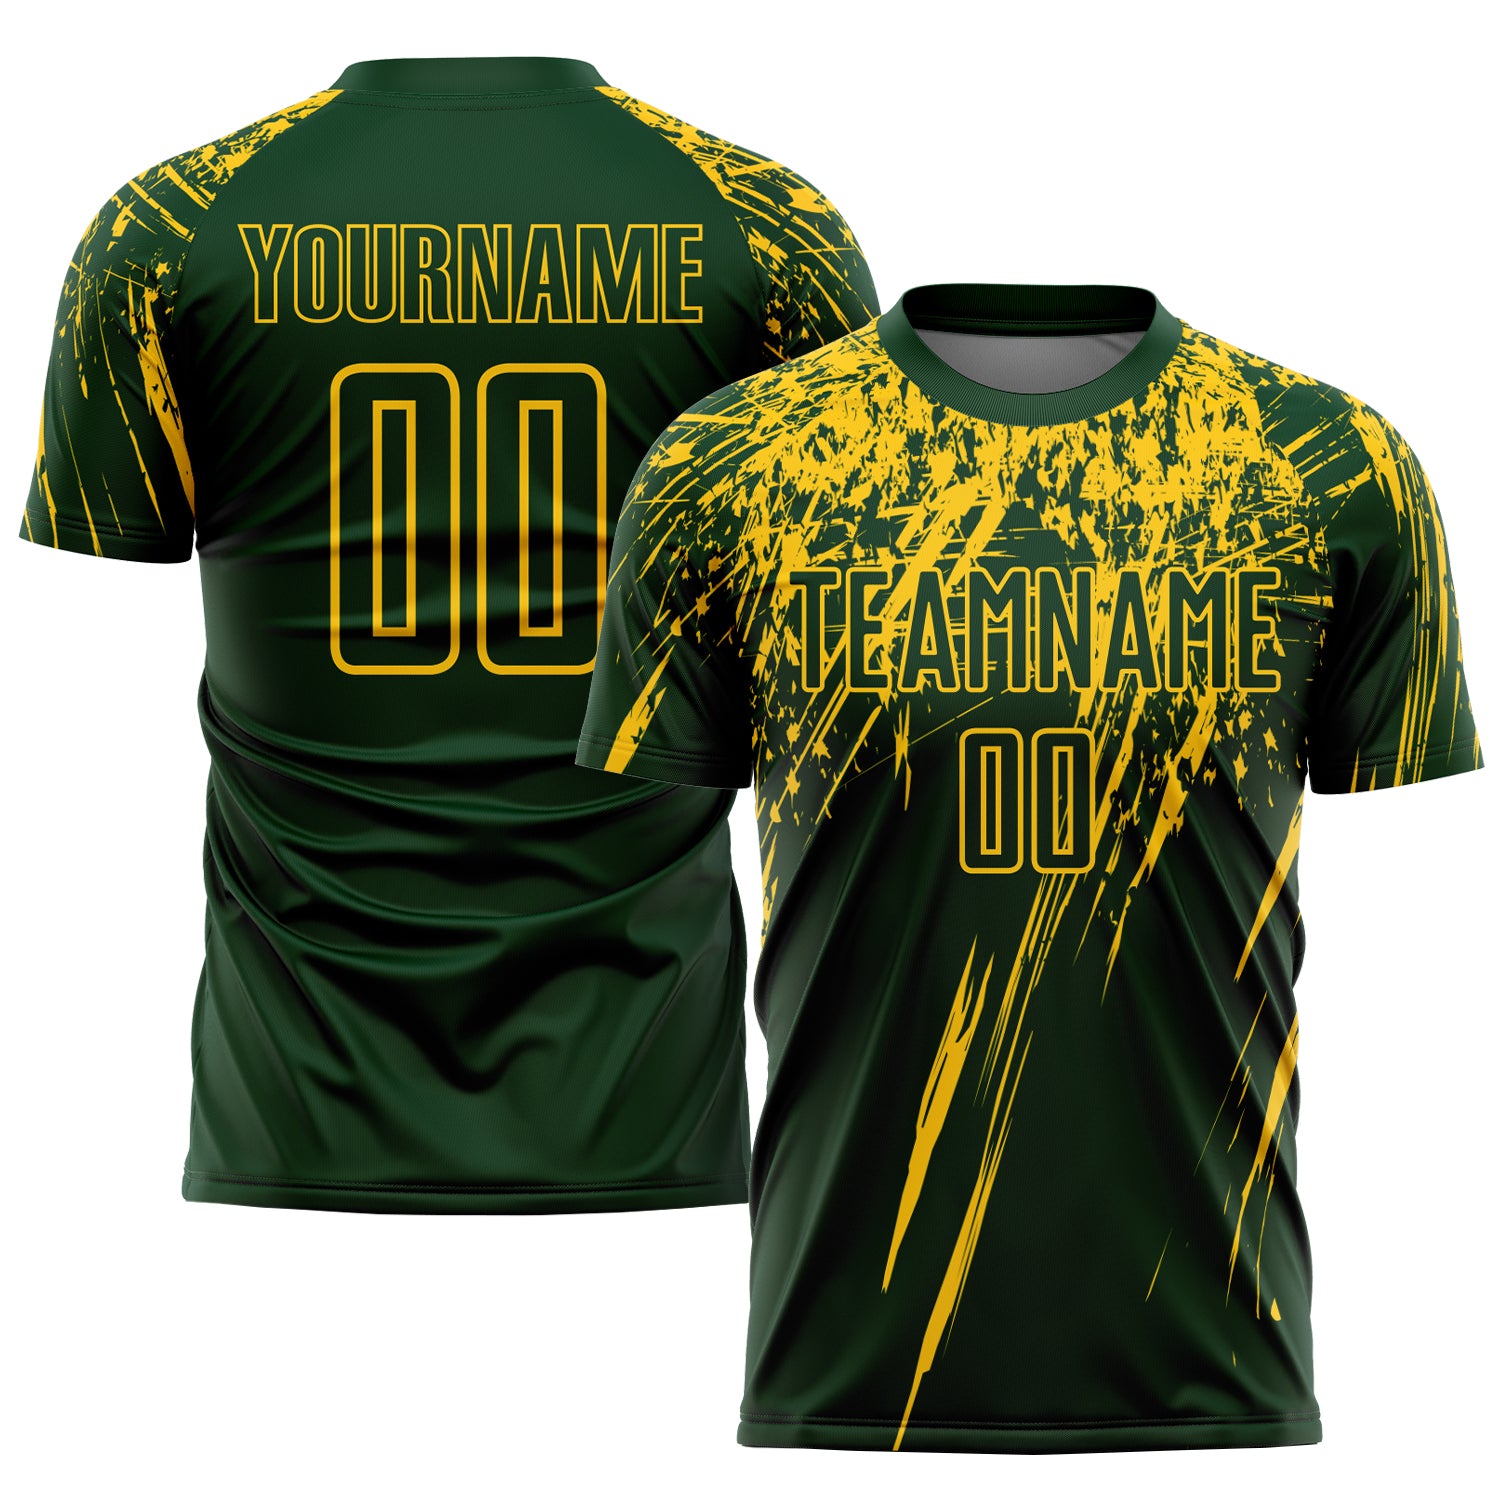 Customised Sublimation Jerseys For All Sports